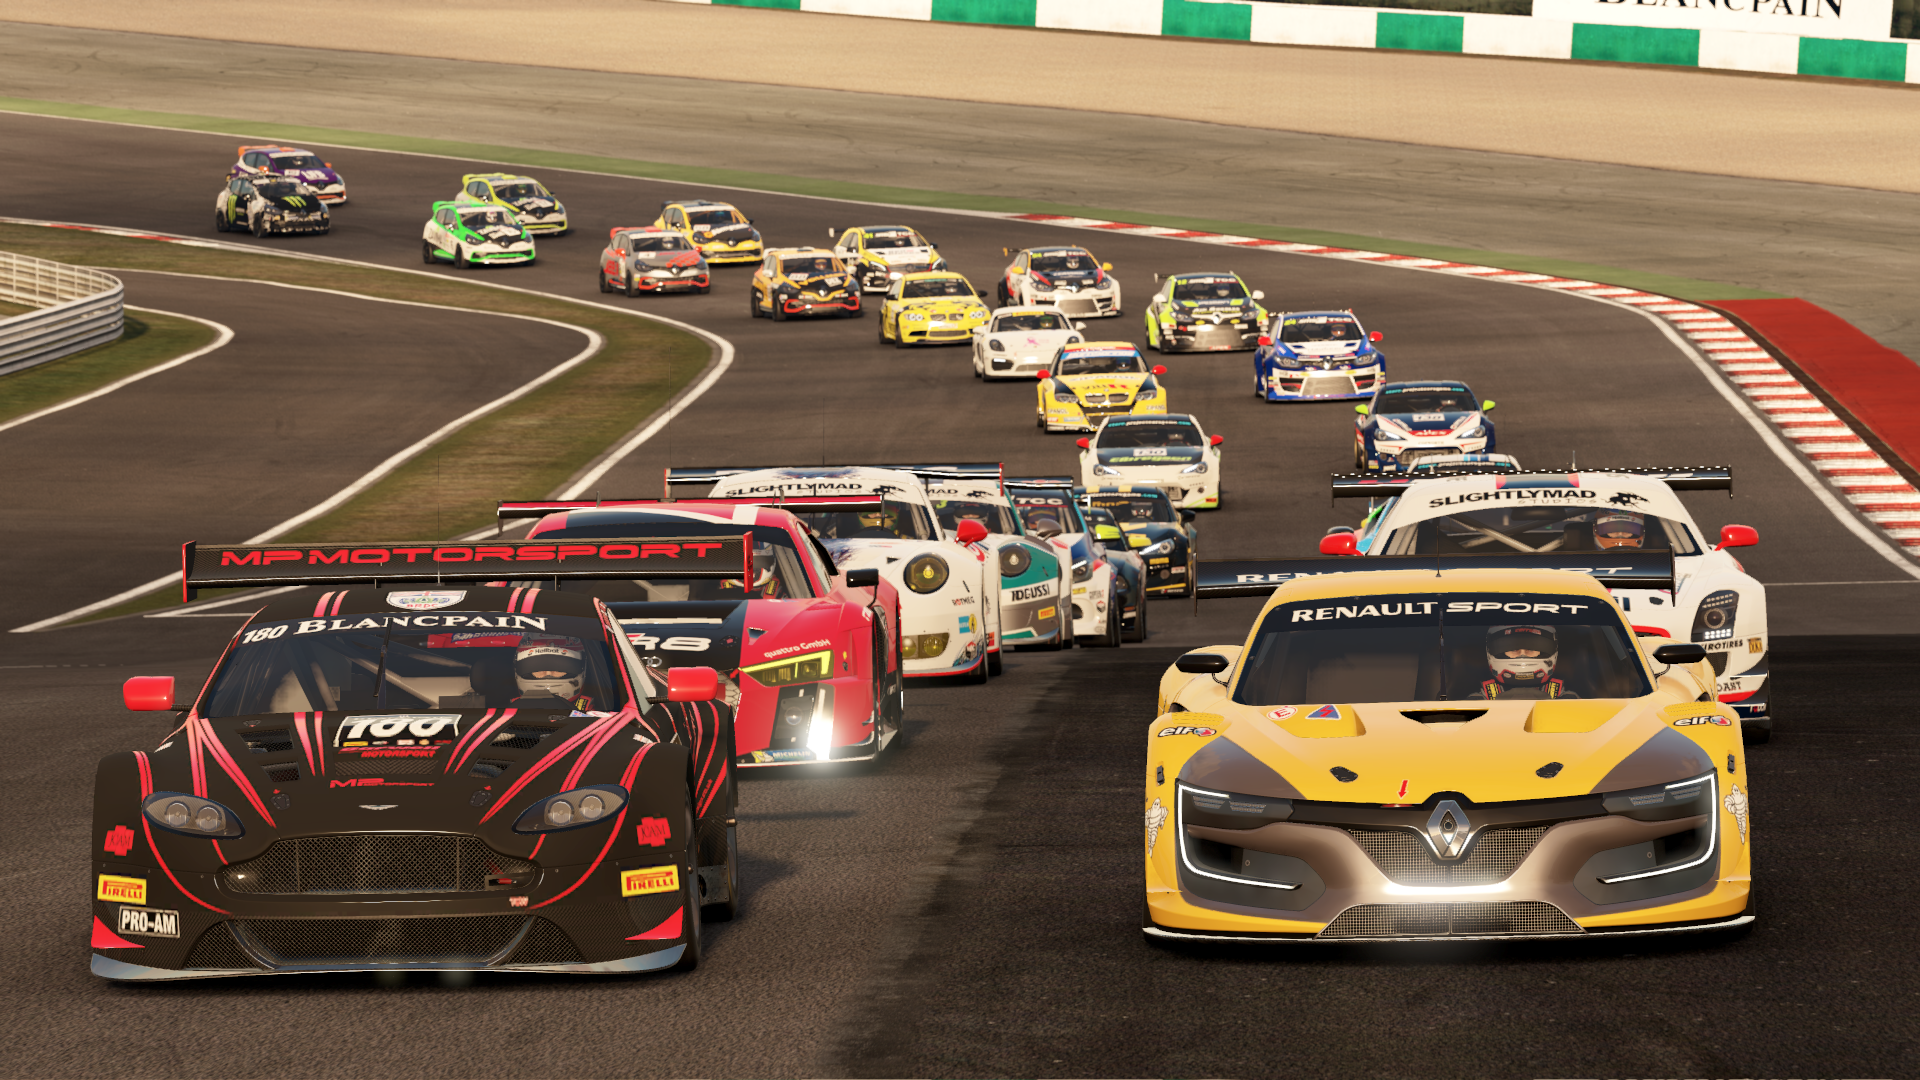 inrichting tyfoon sigaar Project Cars 2 Review - GameSpot